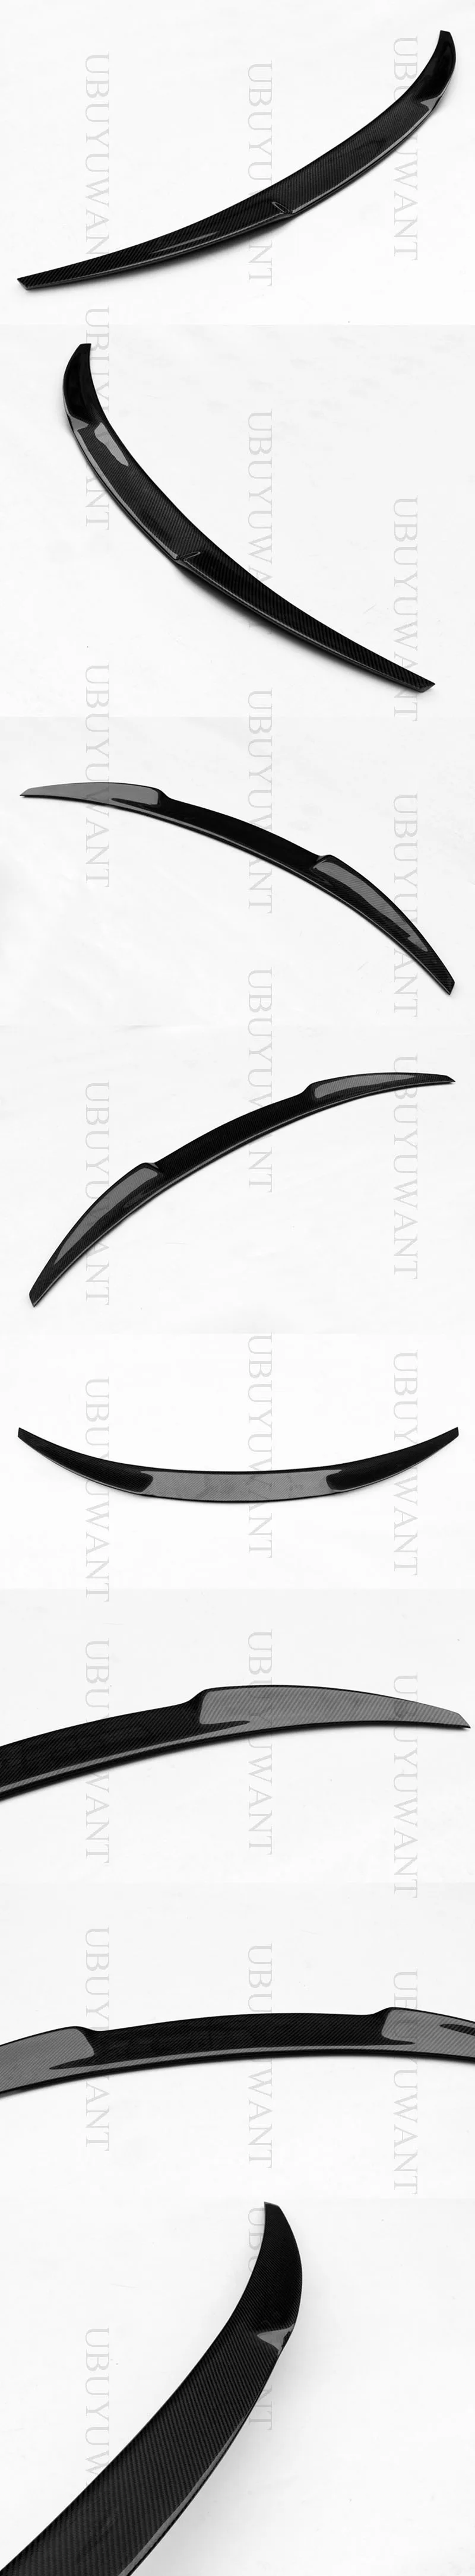 Car Styling Carbon Fiber Exterior Tail Boot Wing Decoration Rear Trunk Spoiler For Alfa Romeo Giulia